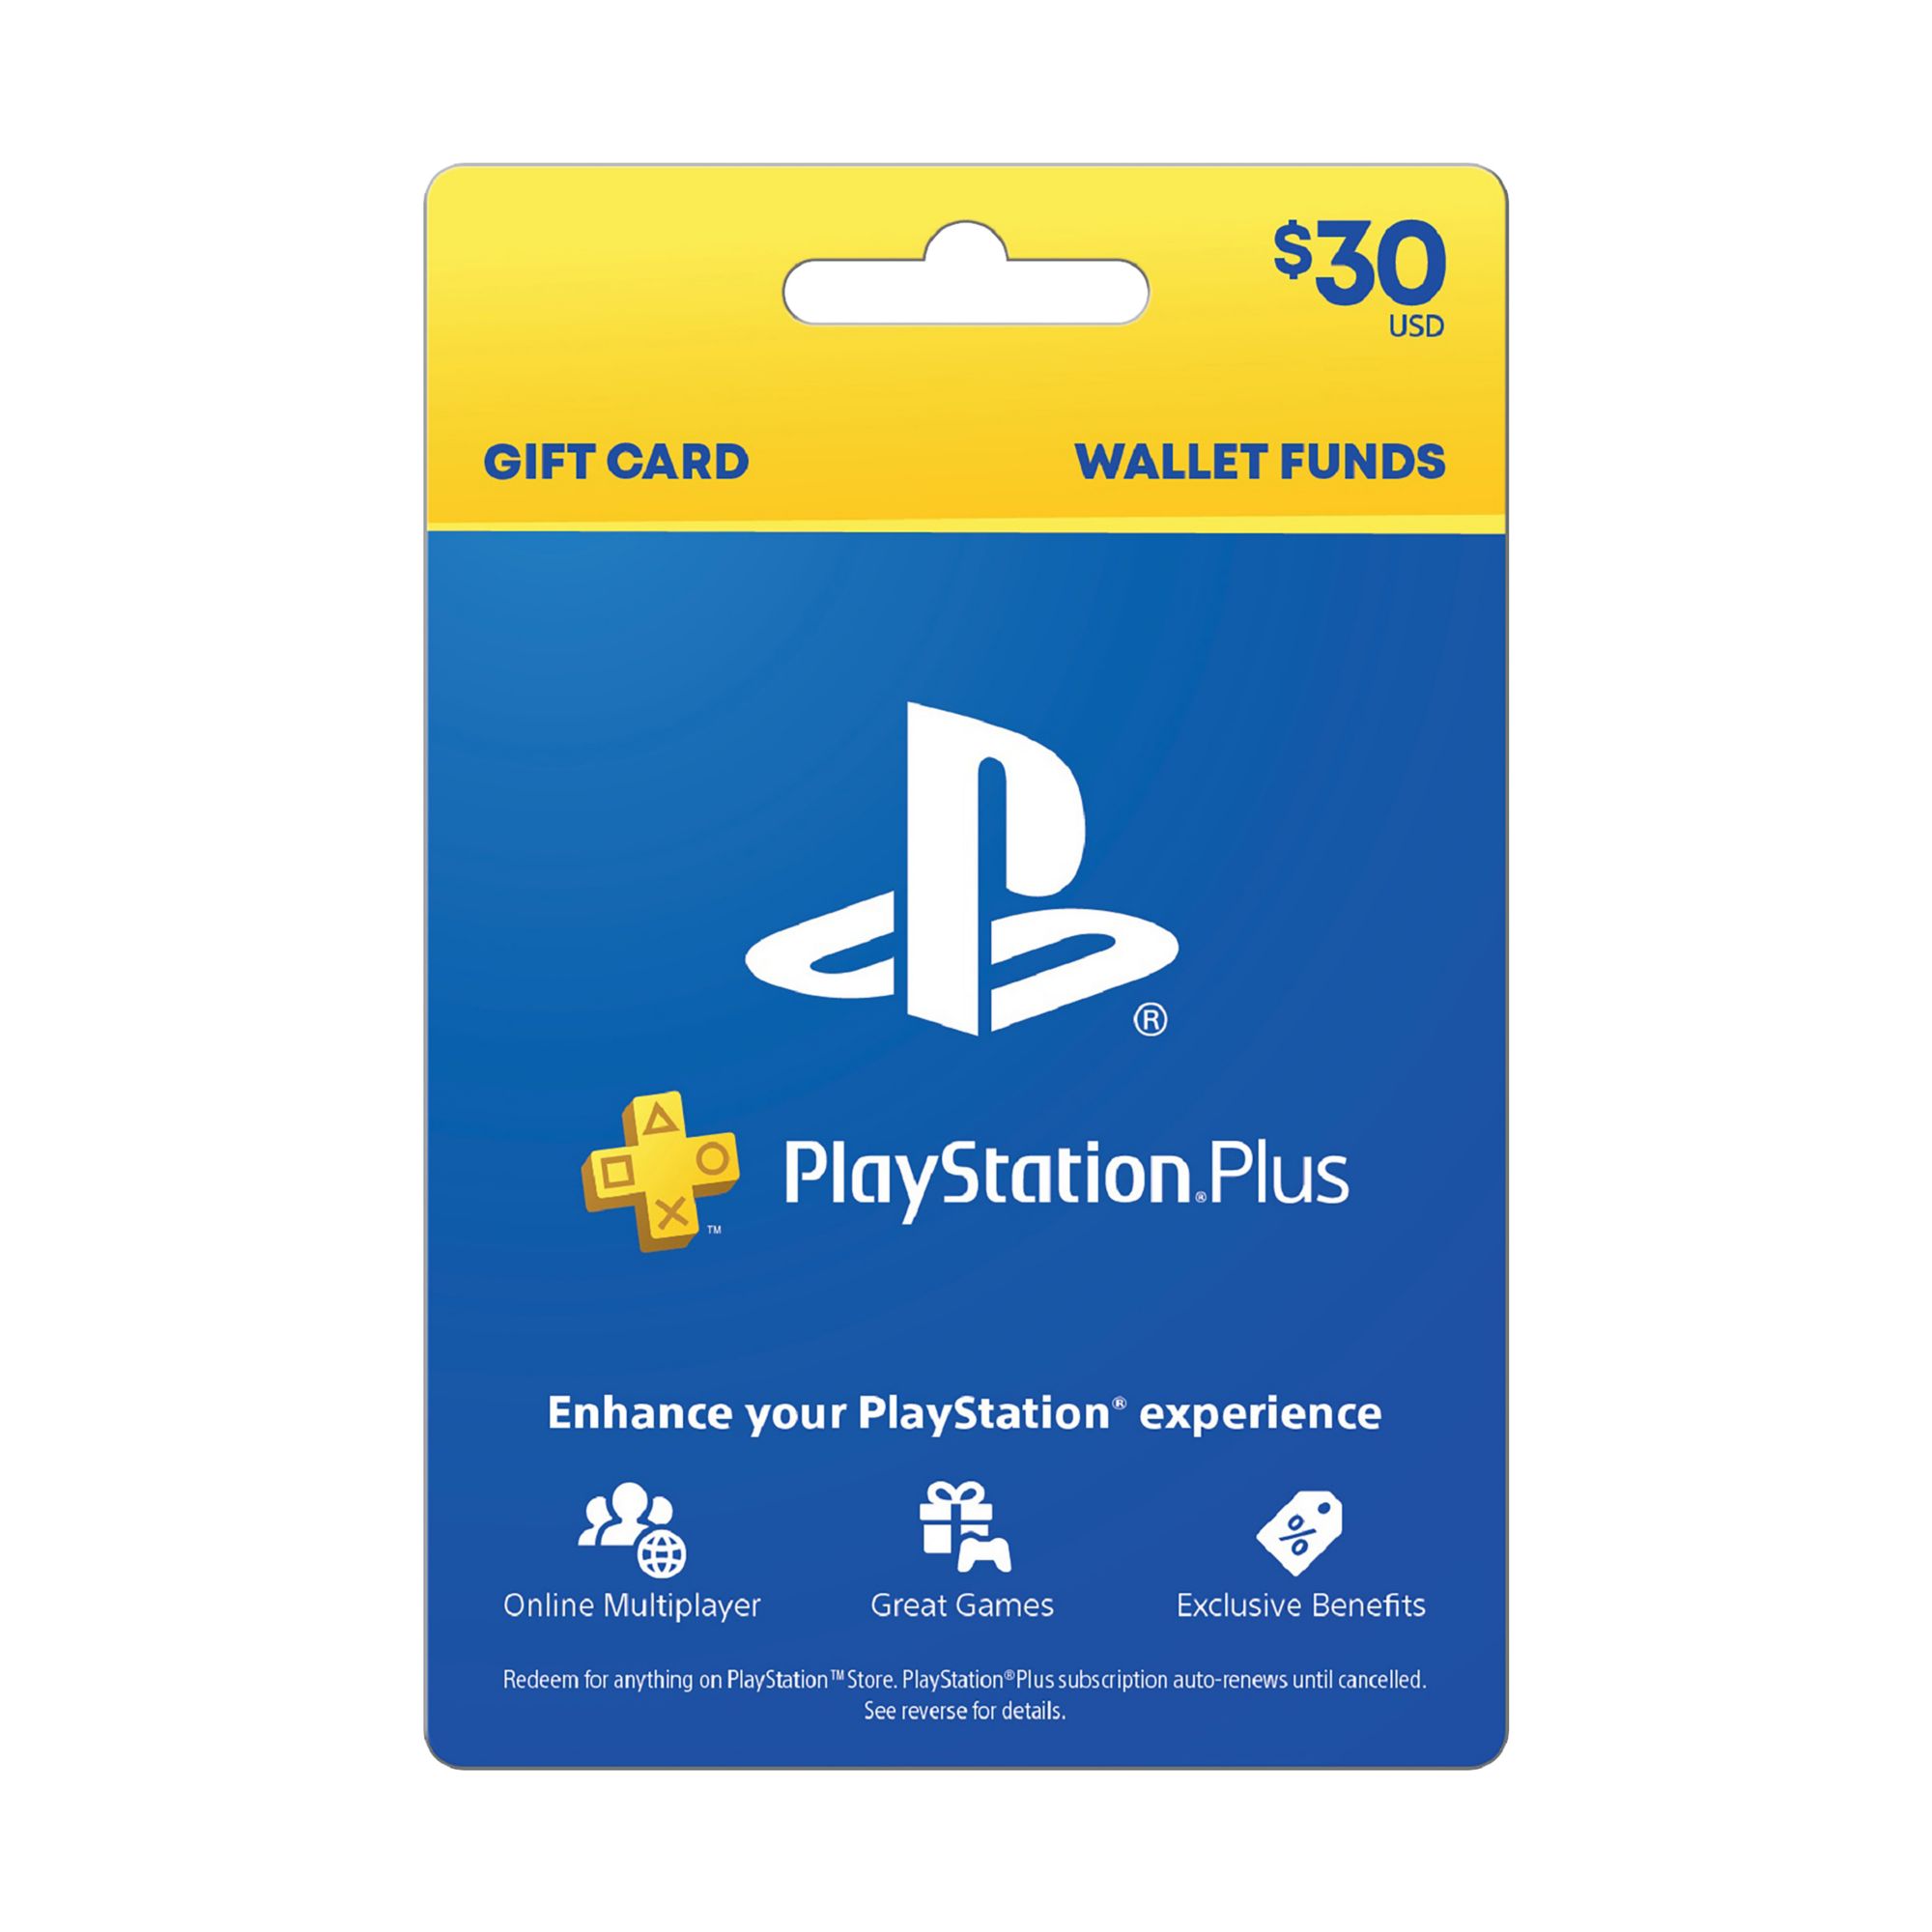 20 PlayStation Store Gift Card for PlayStation Plus Essential, 3 months